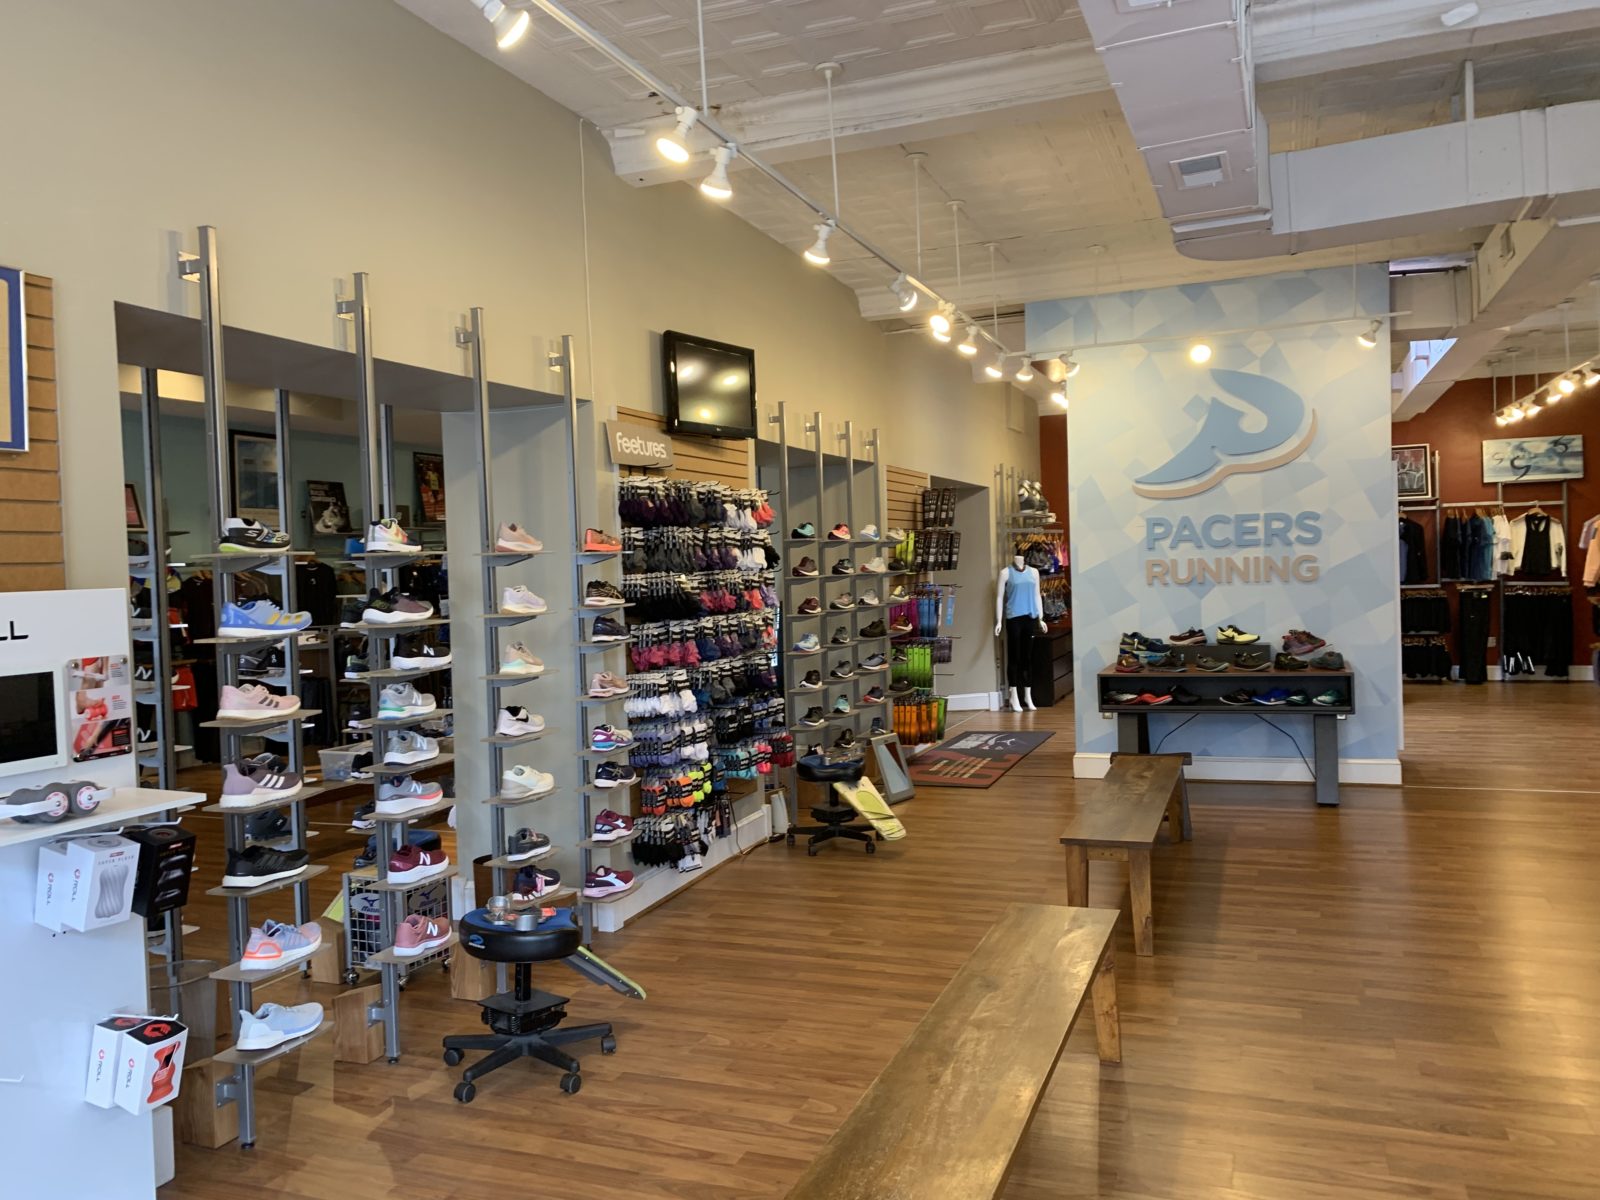 Changes in Store for Pacers Running on King Street | ALXnow